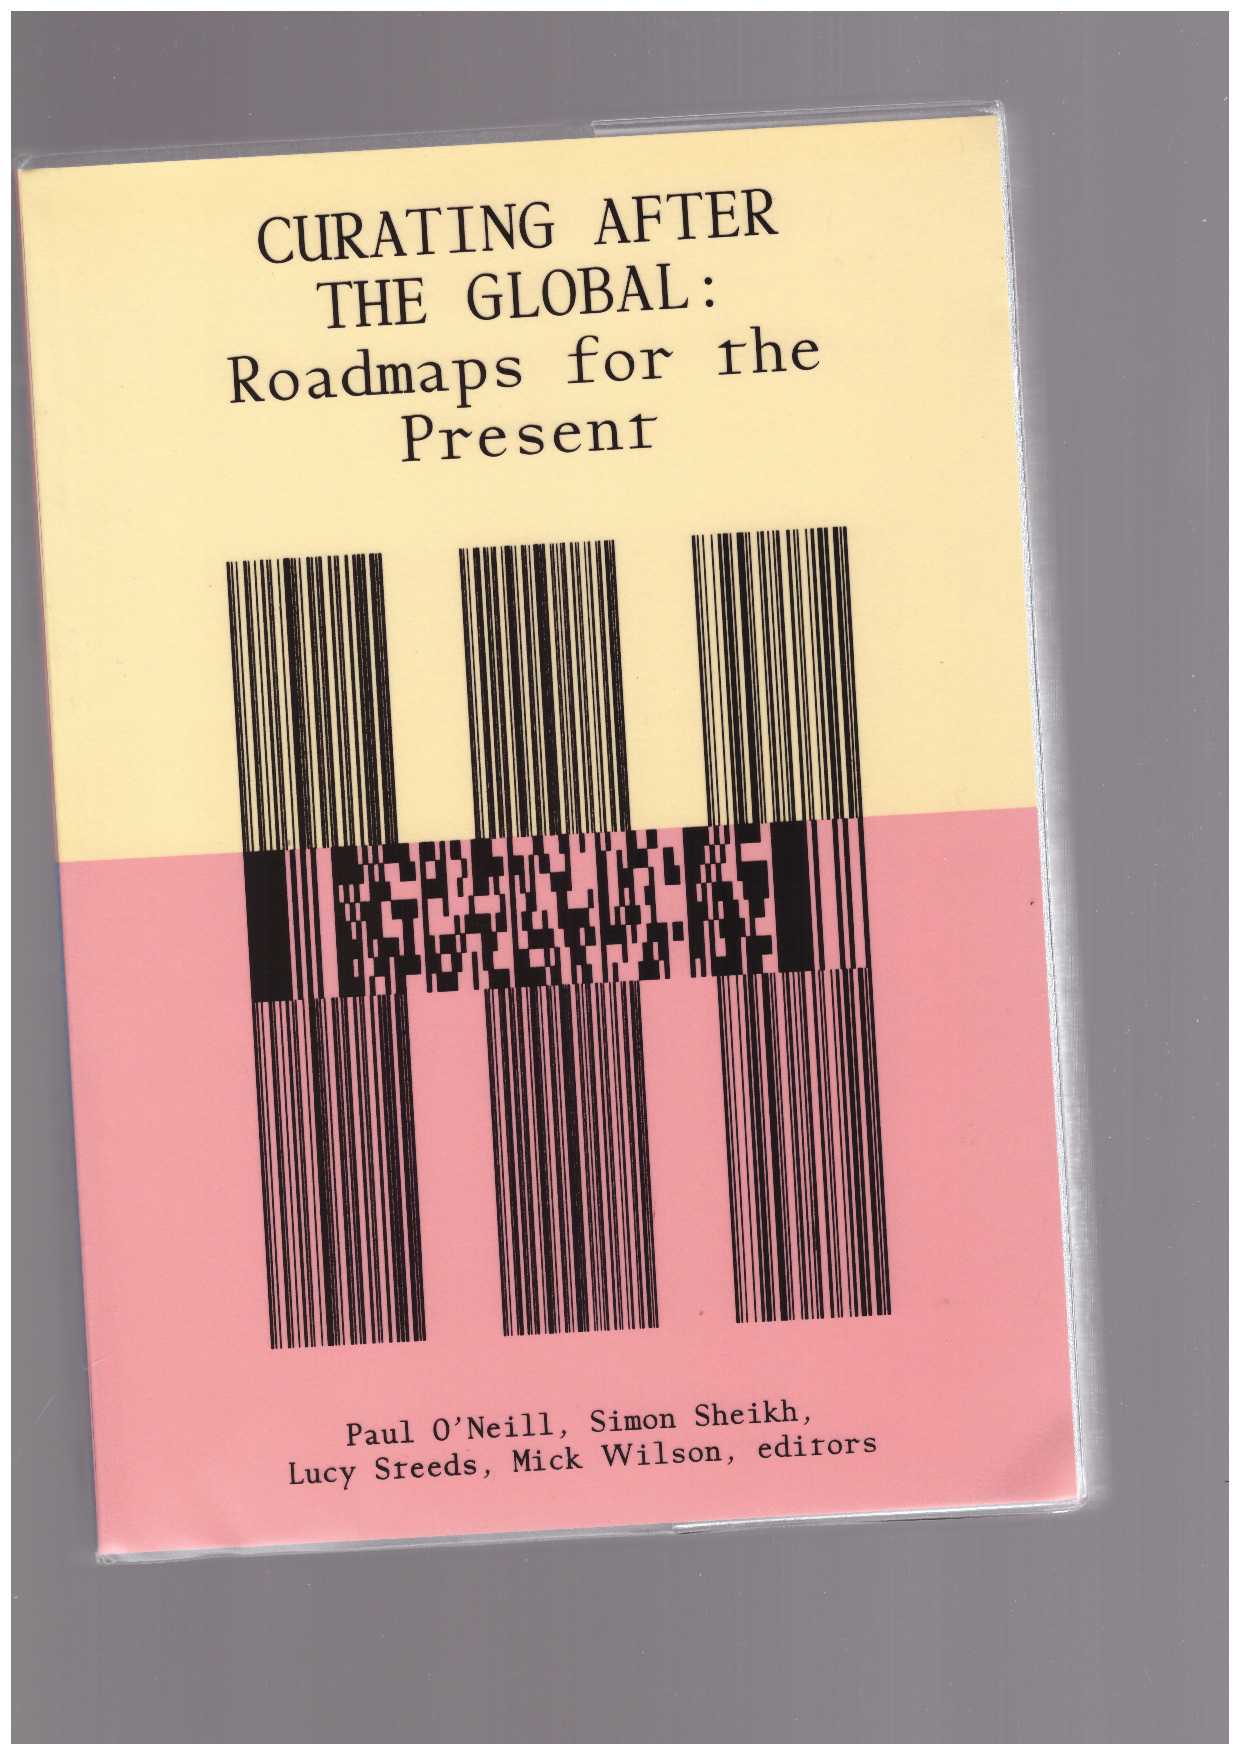 O'NEILL, Paul; SHEIKH, Simon; STEEDS, Lucy; WILSON, Mick (eds.) - Curating After the Global. Roadmaps for the Present